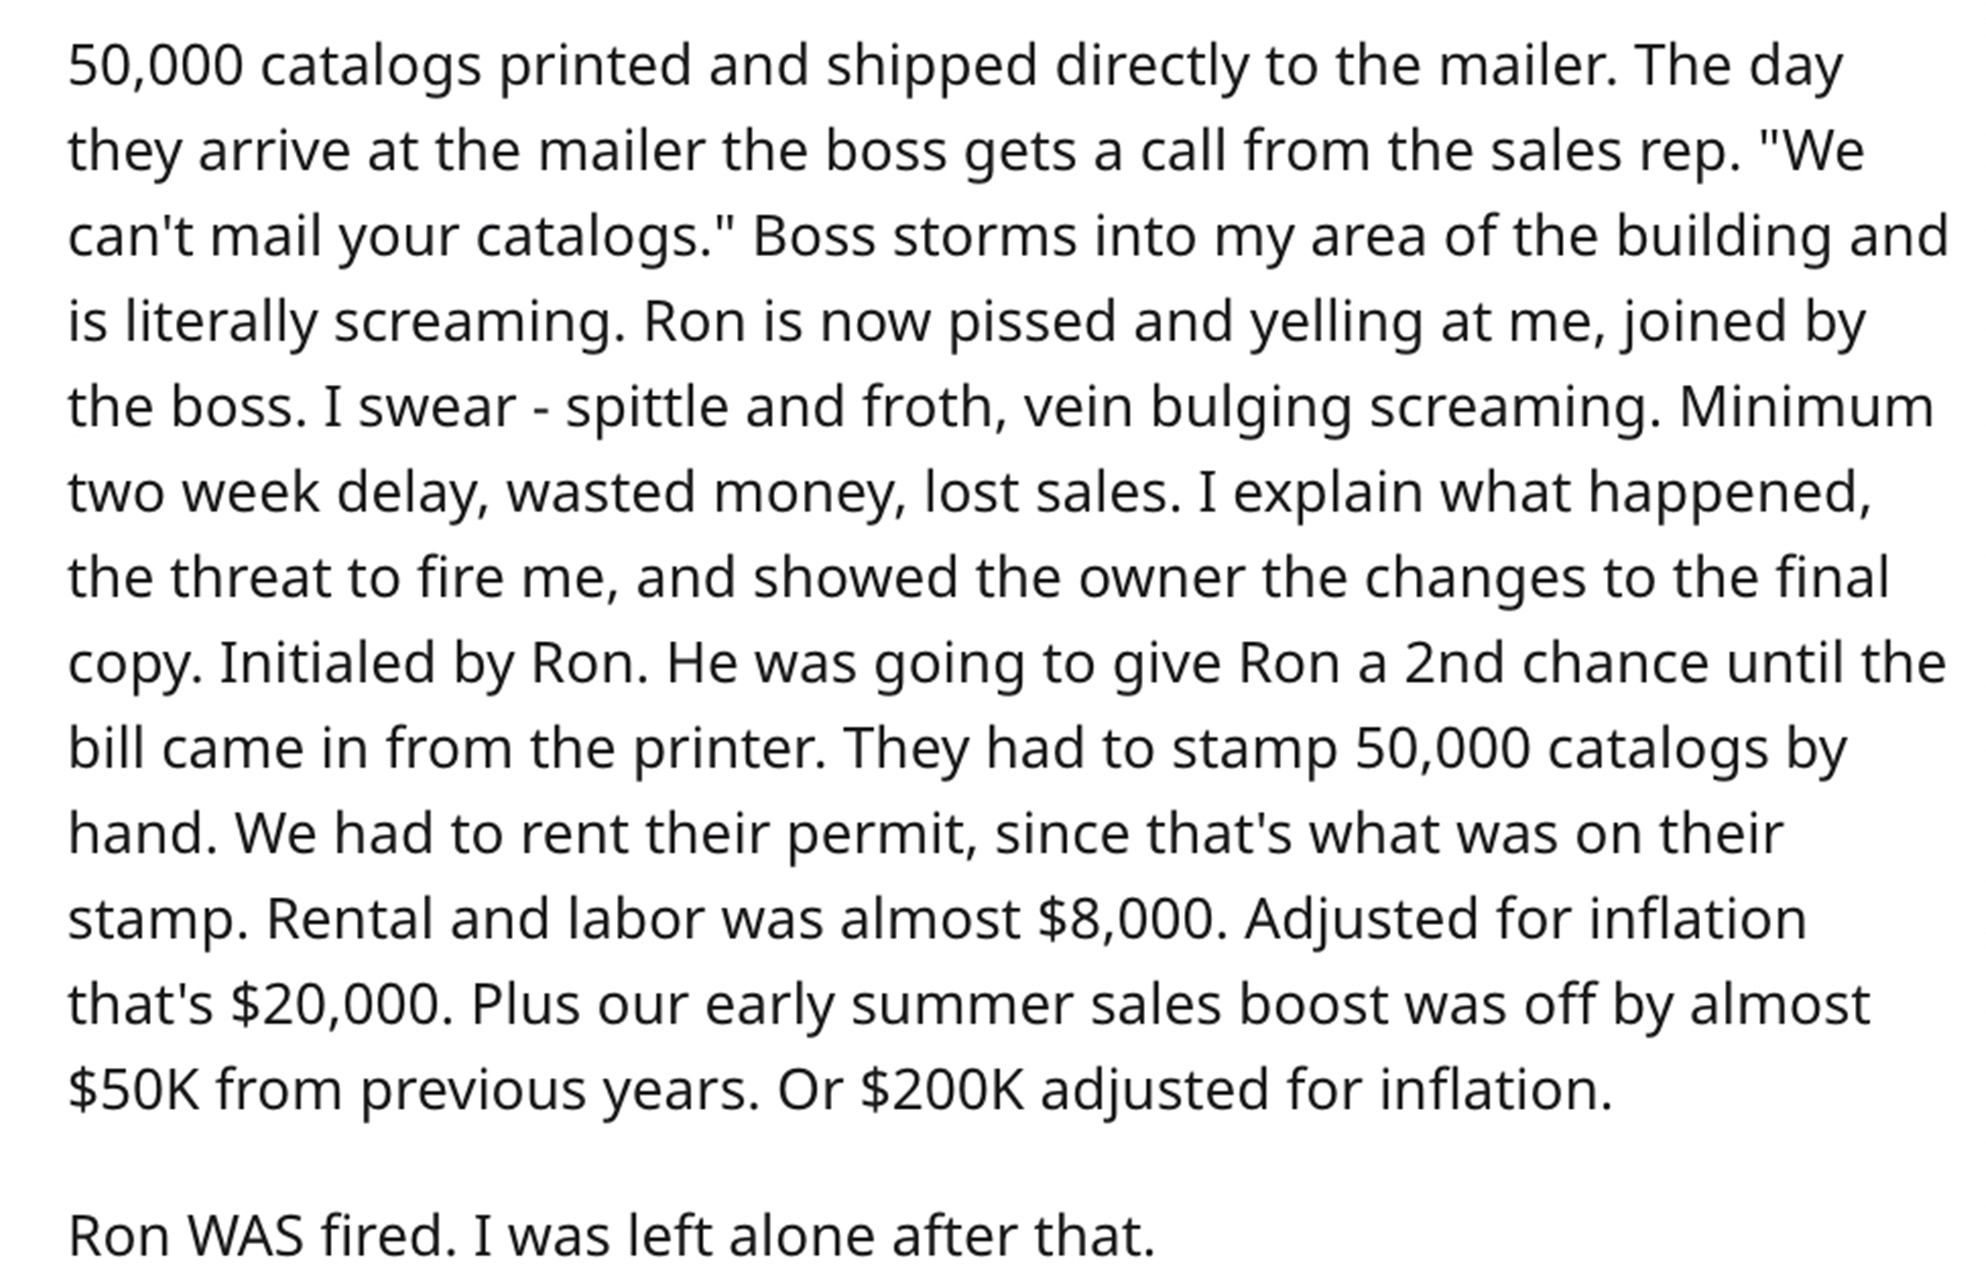 Entitled Boss gets fired - angle - 50,000 catalogs printed and shipped directly to the mailer. The day they arrive at the mailer the boss gets a call from the sales rep. "We can't mail your catalogs." Boss storms into my area of the building and is litera